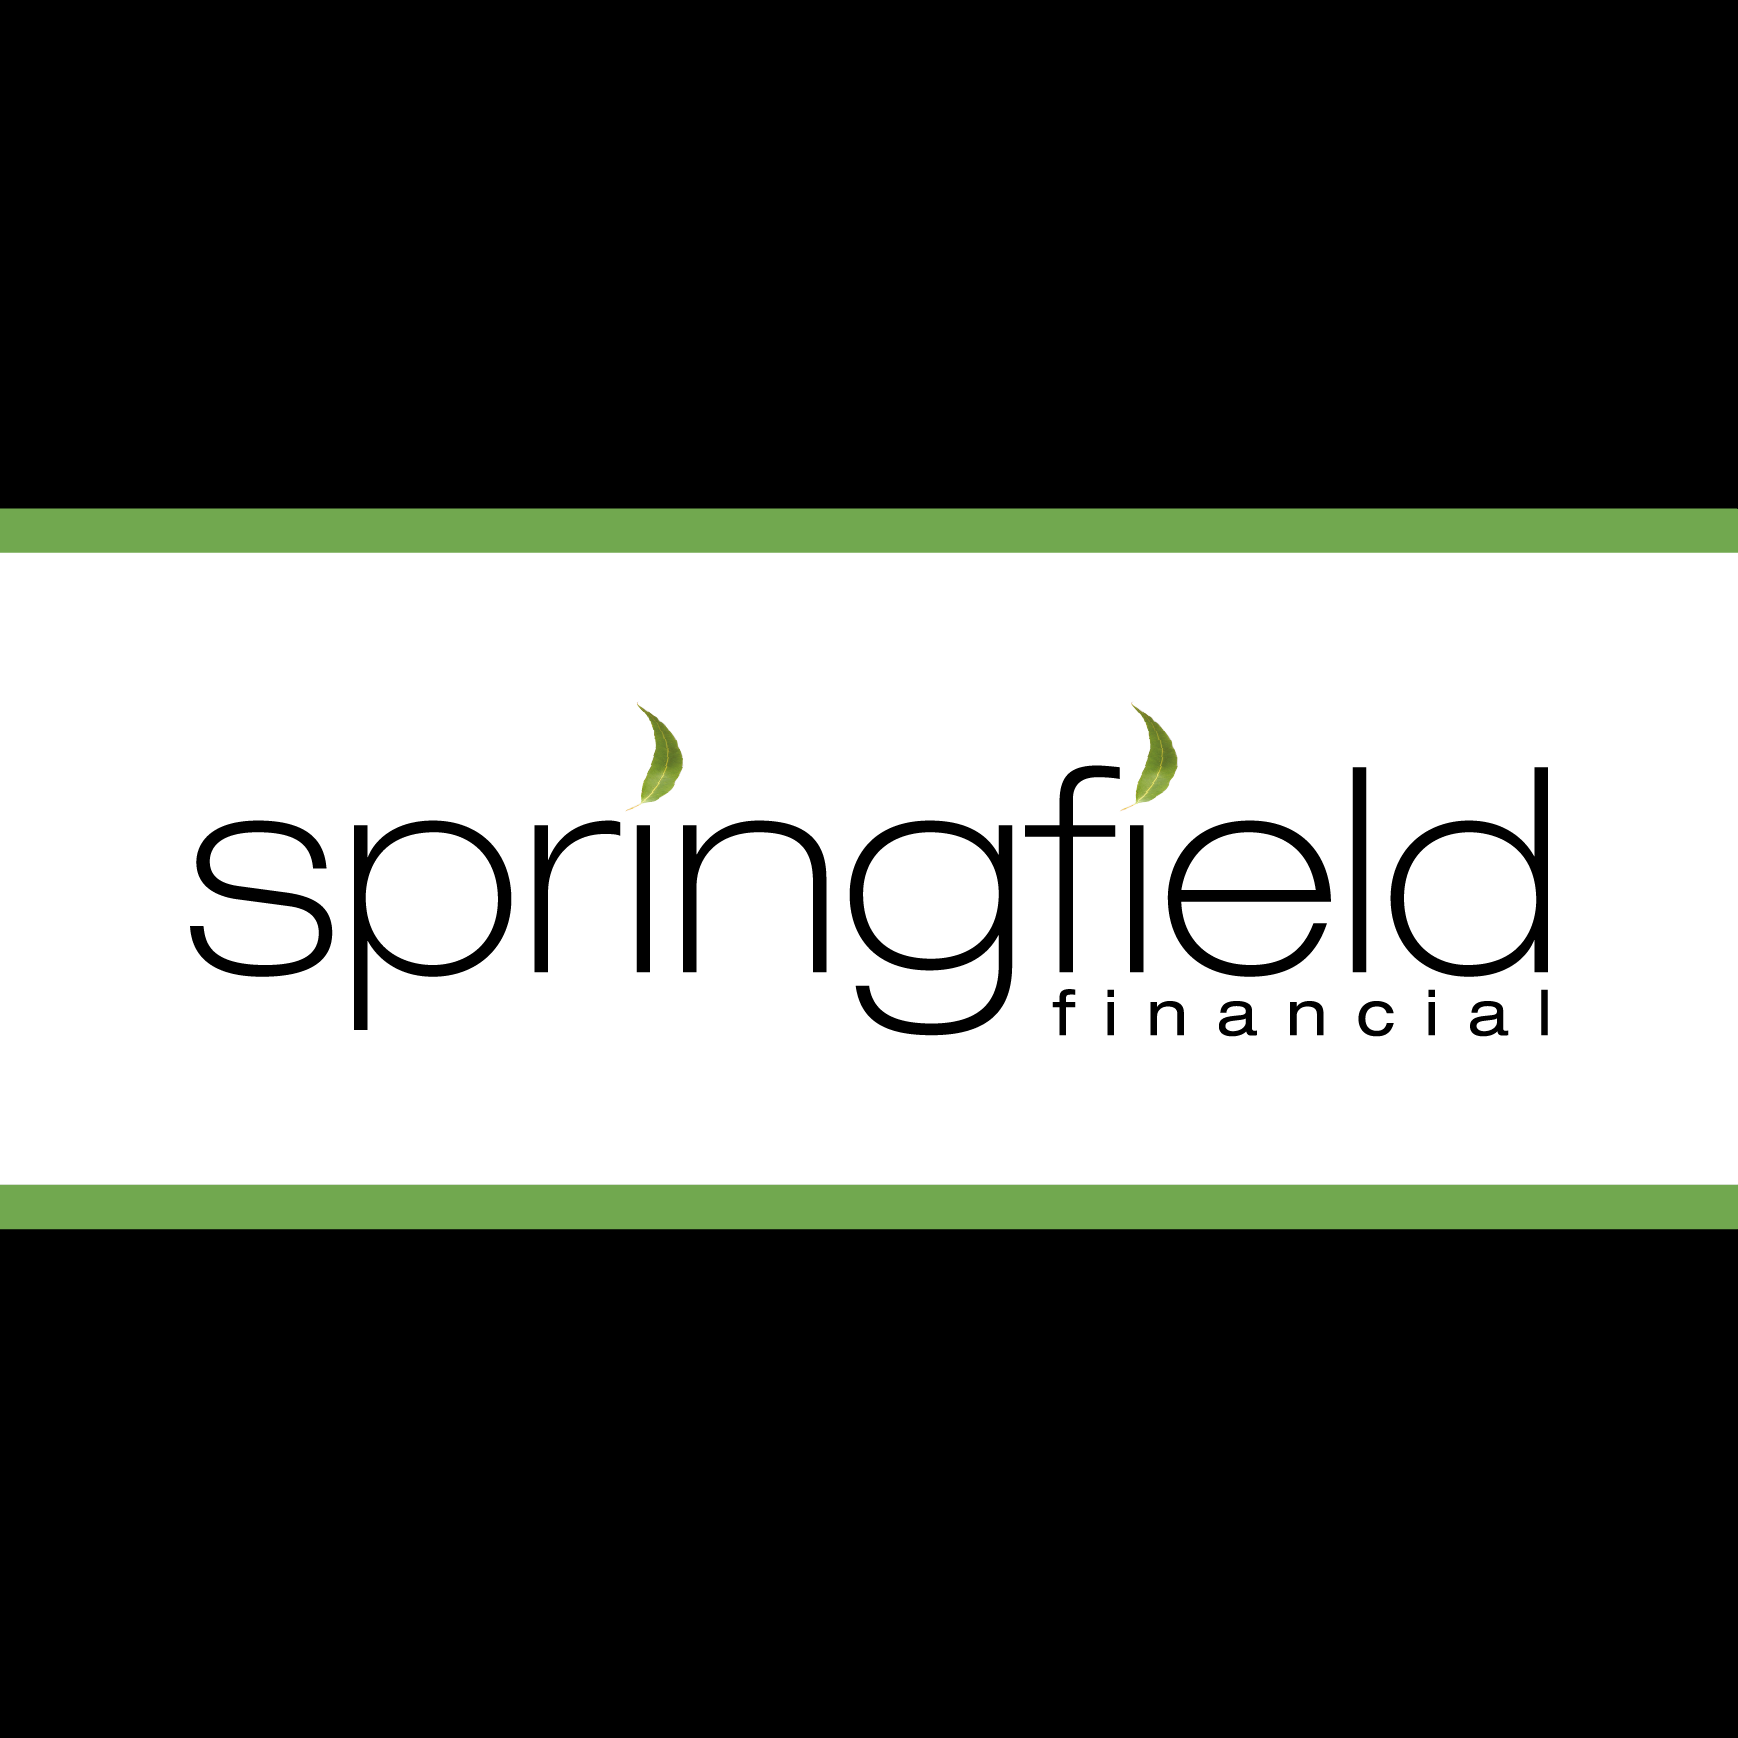 Club Image for SPRINGFIELD FINANCIAL